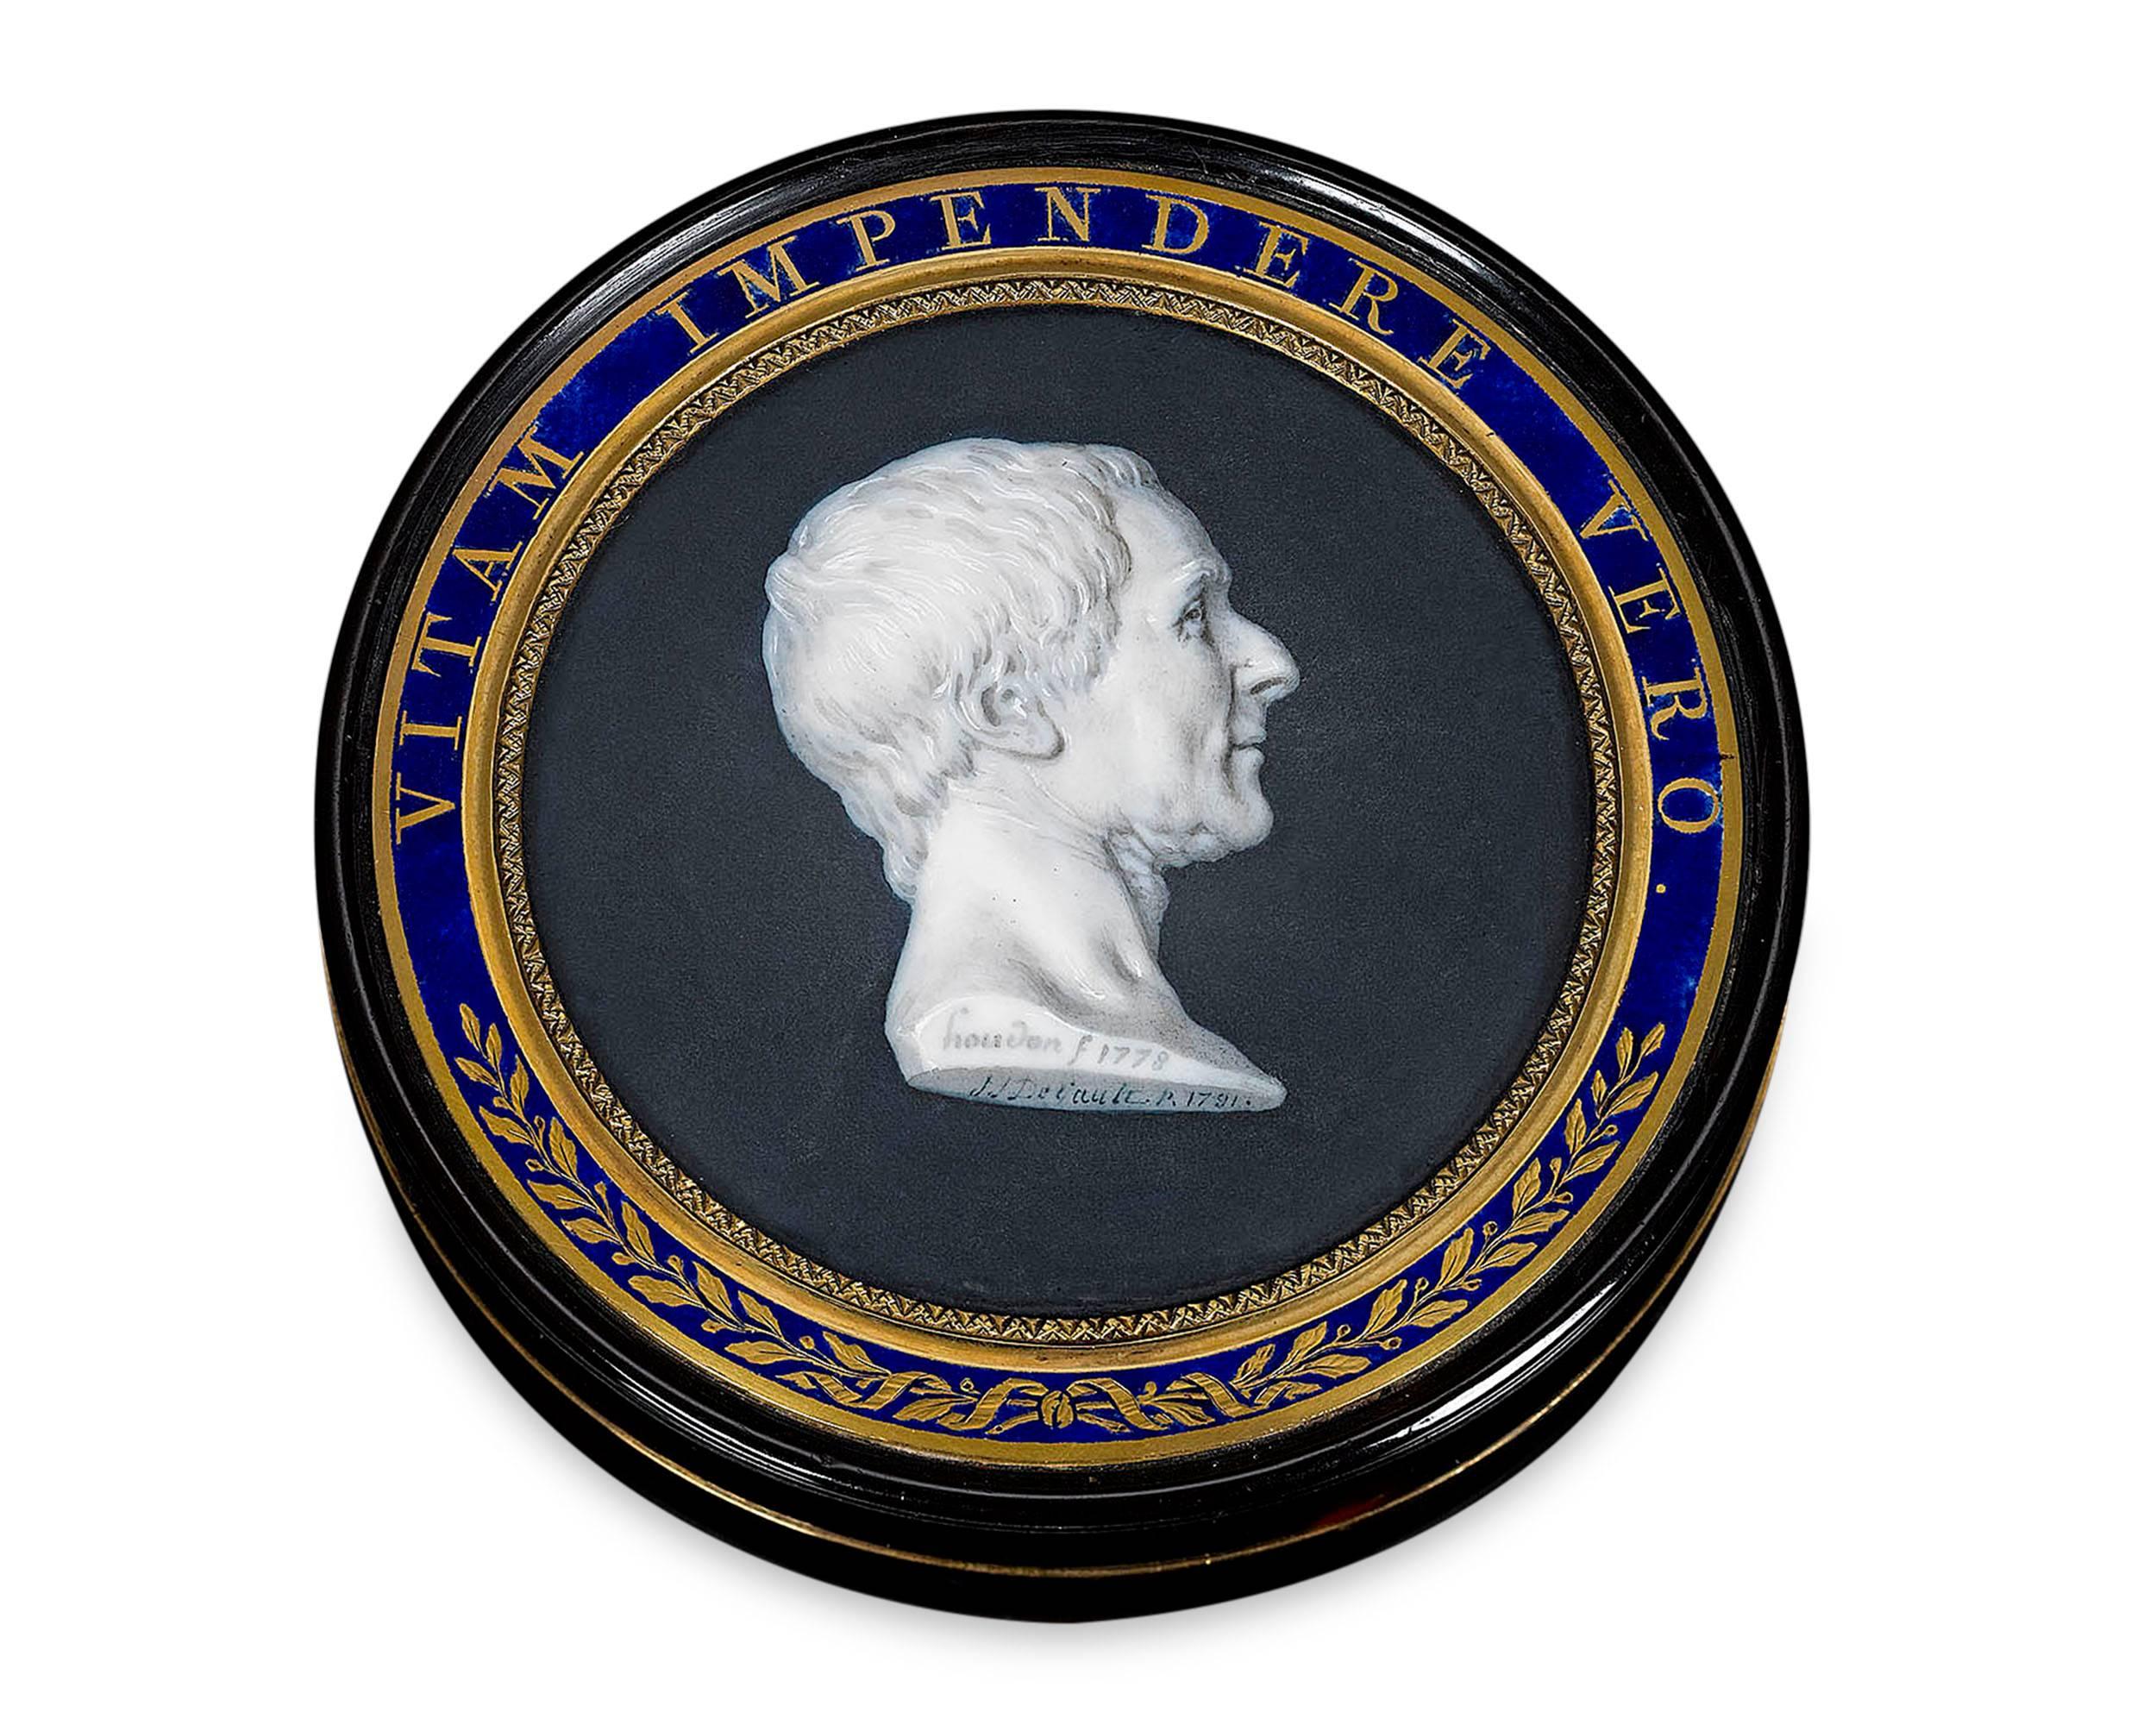 An exquisite miniature of French philosopher Charles Montesquieu graces the lid of this tortoiseshell-lined snuff box. The handsome portrait was fashioned by the renowned Jacques-Joseph de Gault of France after a popular bust by the French